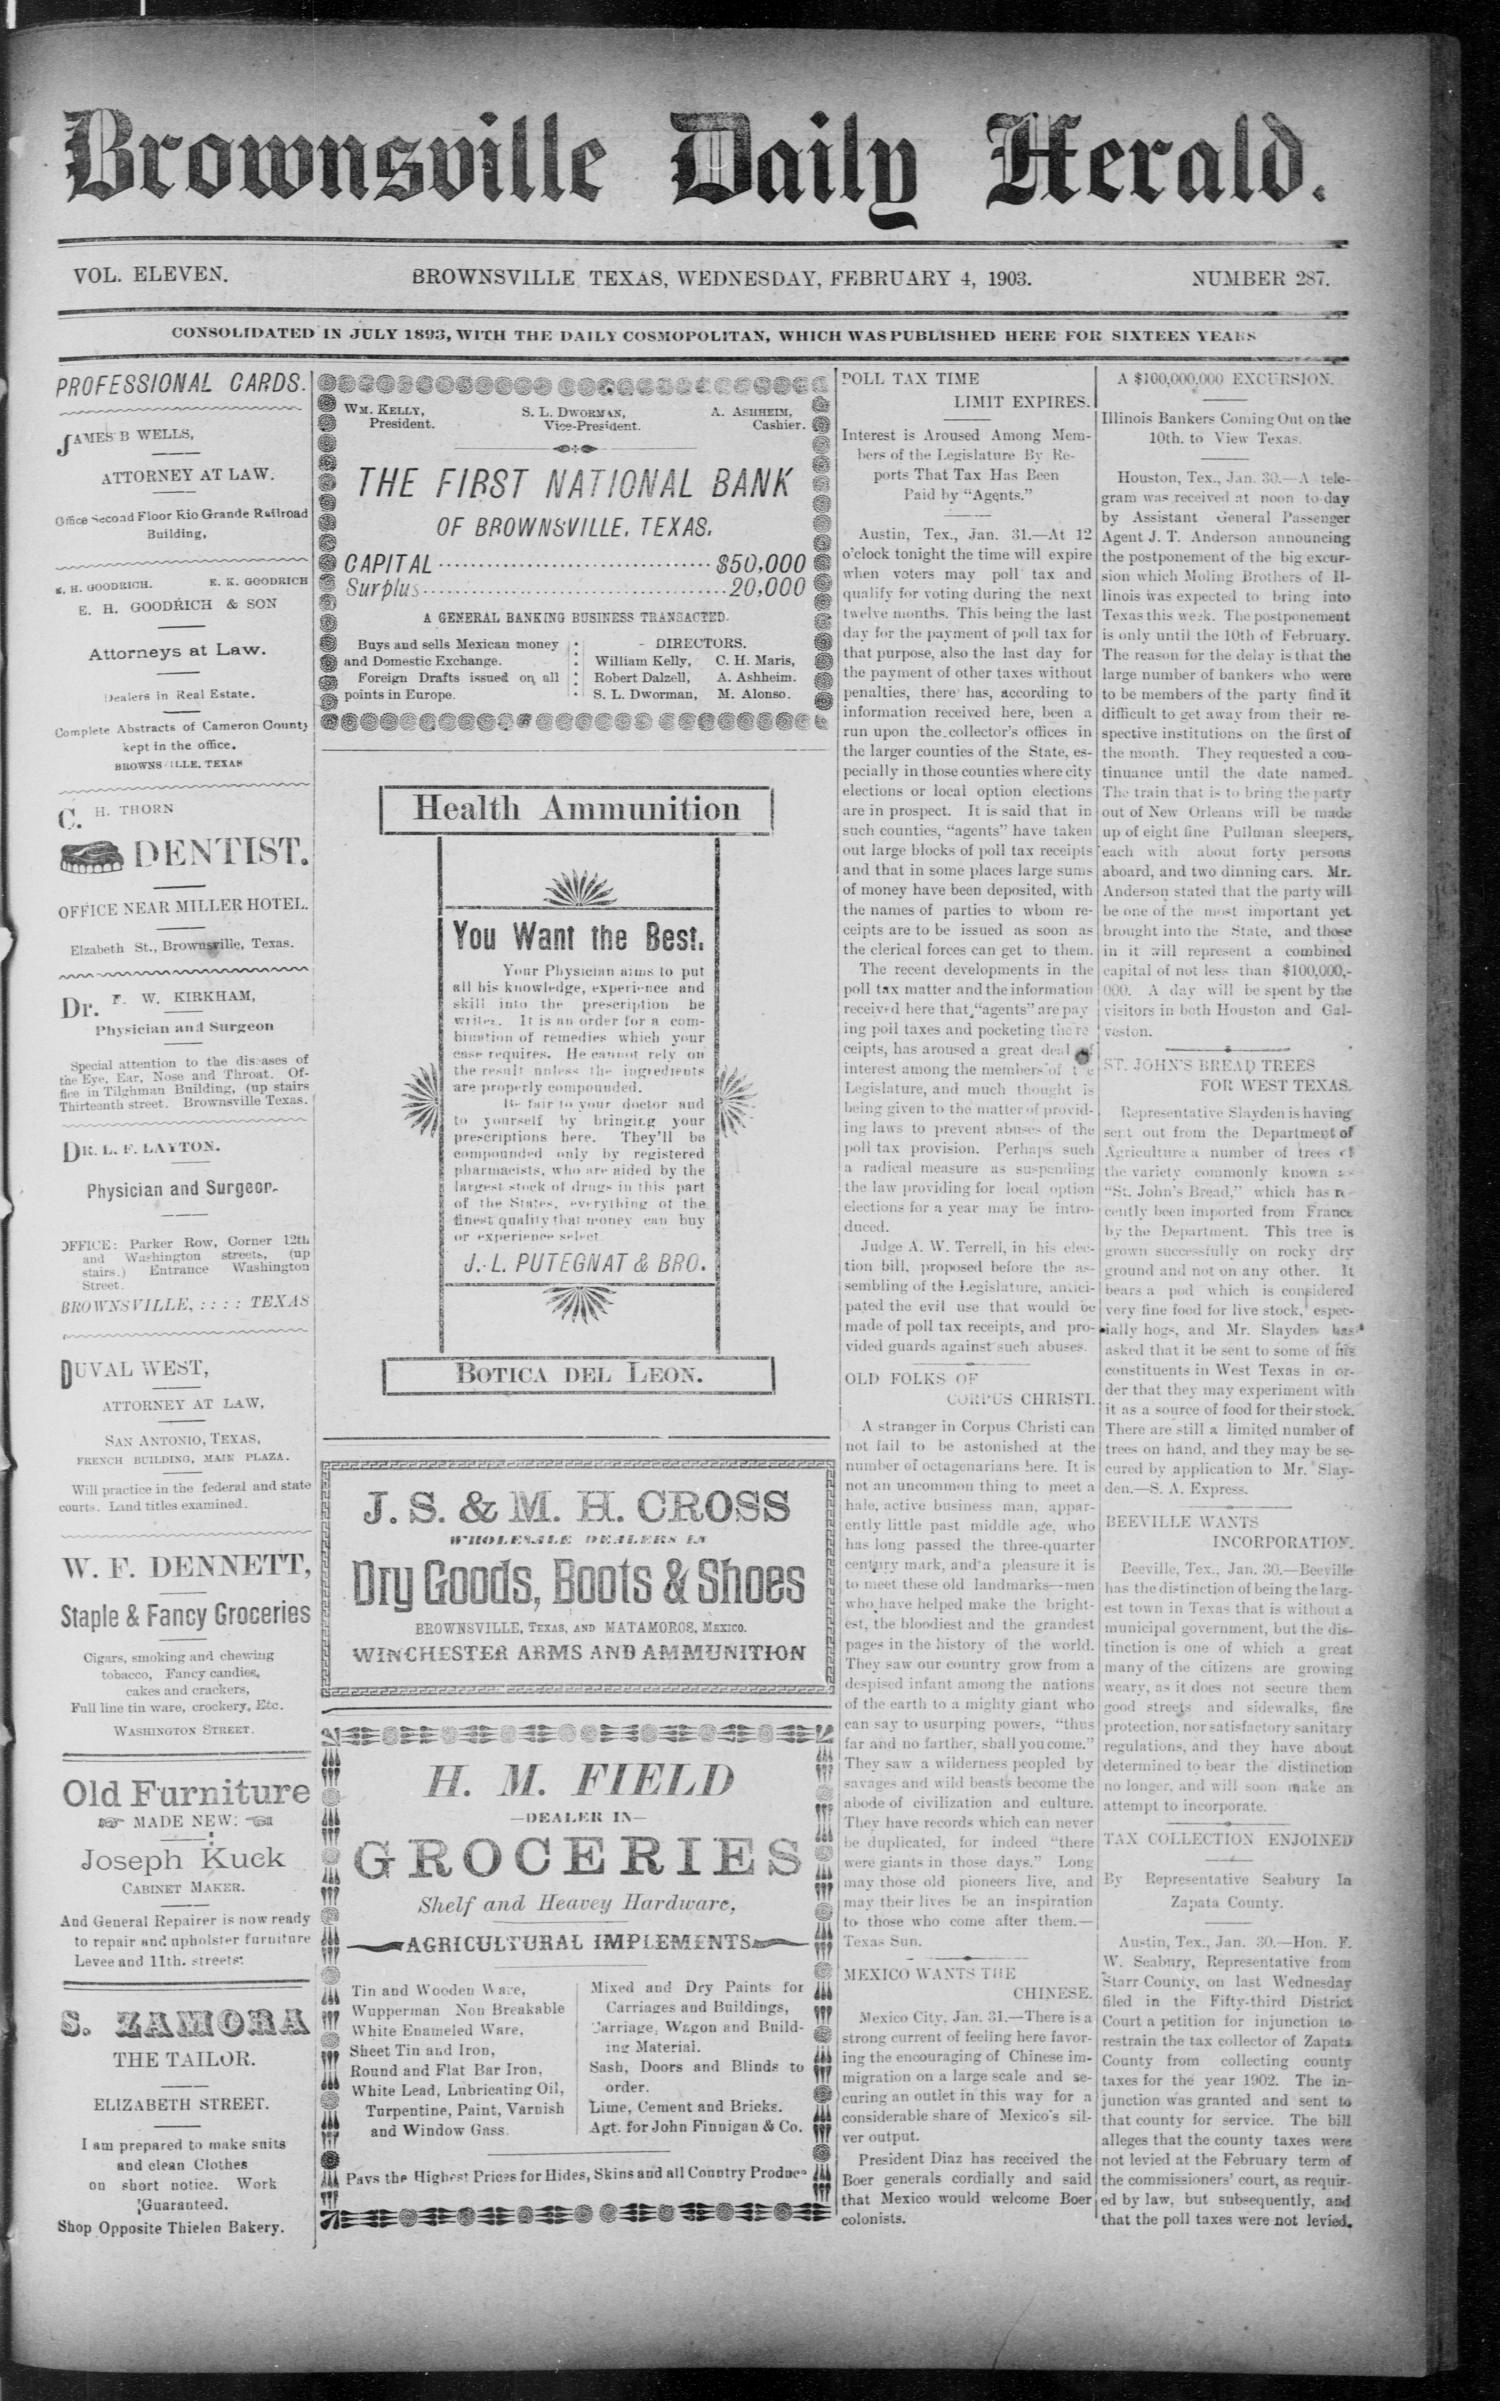 The Brownsville Daily Herald. (Brownsville, Tex.), Vol. ELEVEN, No. 287, Ed. 1, Wednesday, February 4, 1903
                                                
                                                    [Sequence #]: 1 of 4
                                                